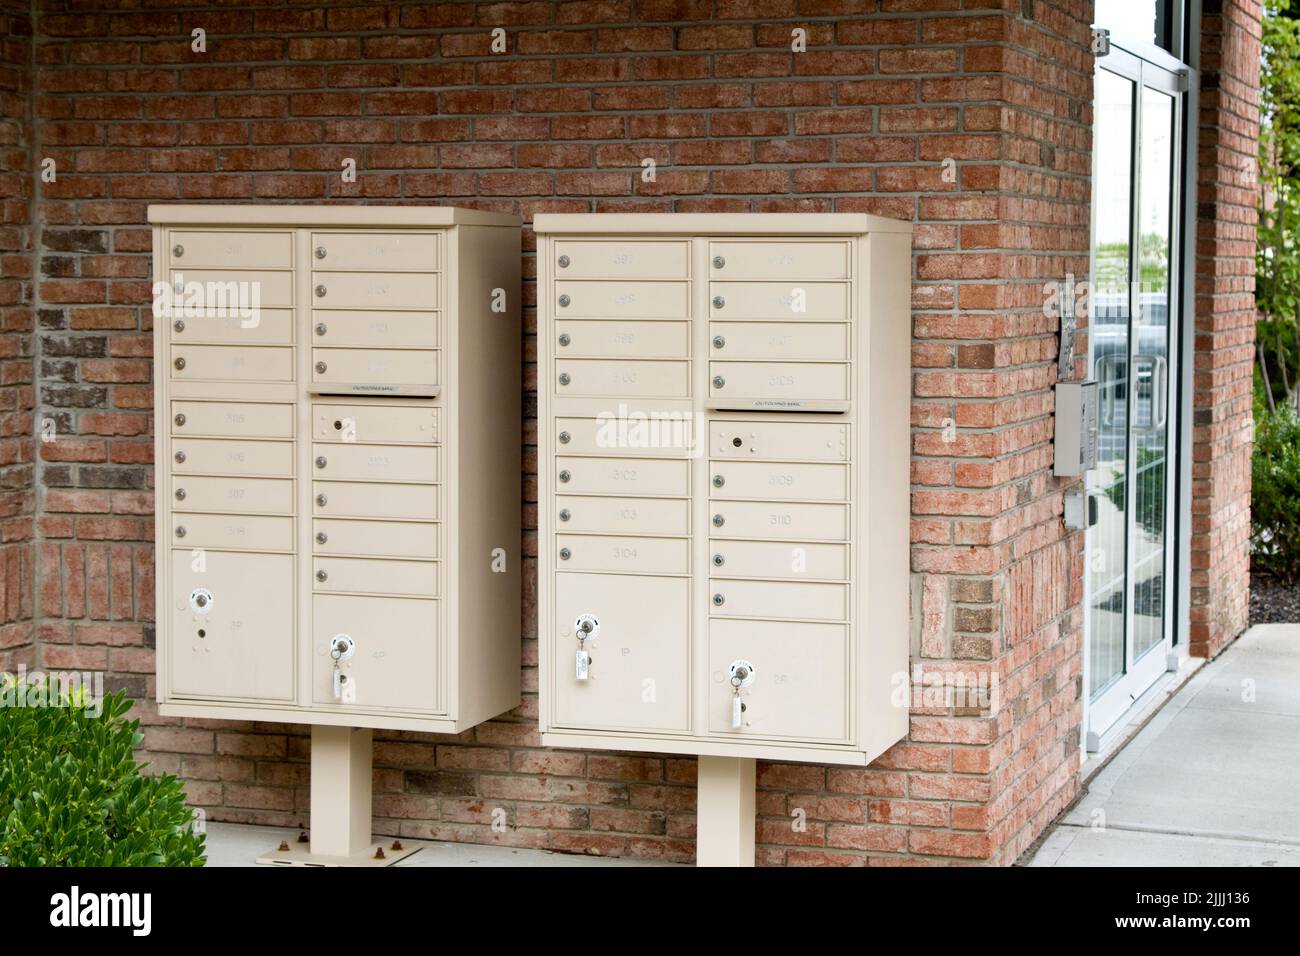 Apartment mail boxes at entrance of high rise building. Stock Photo